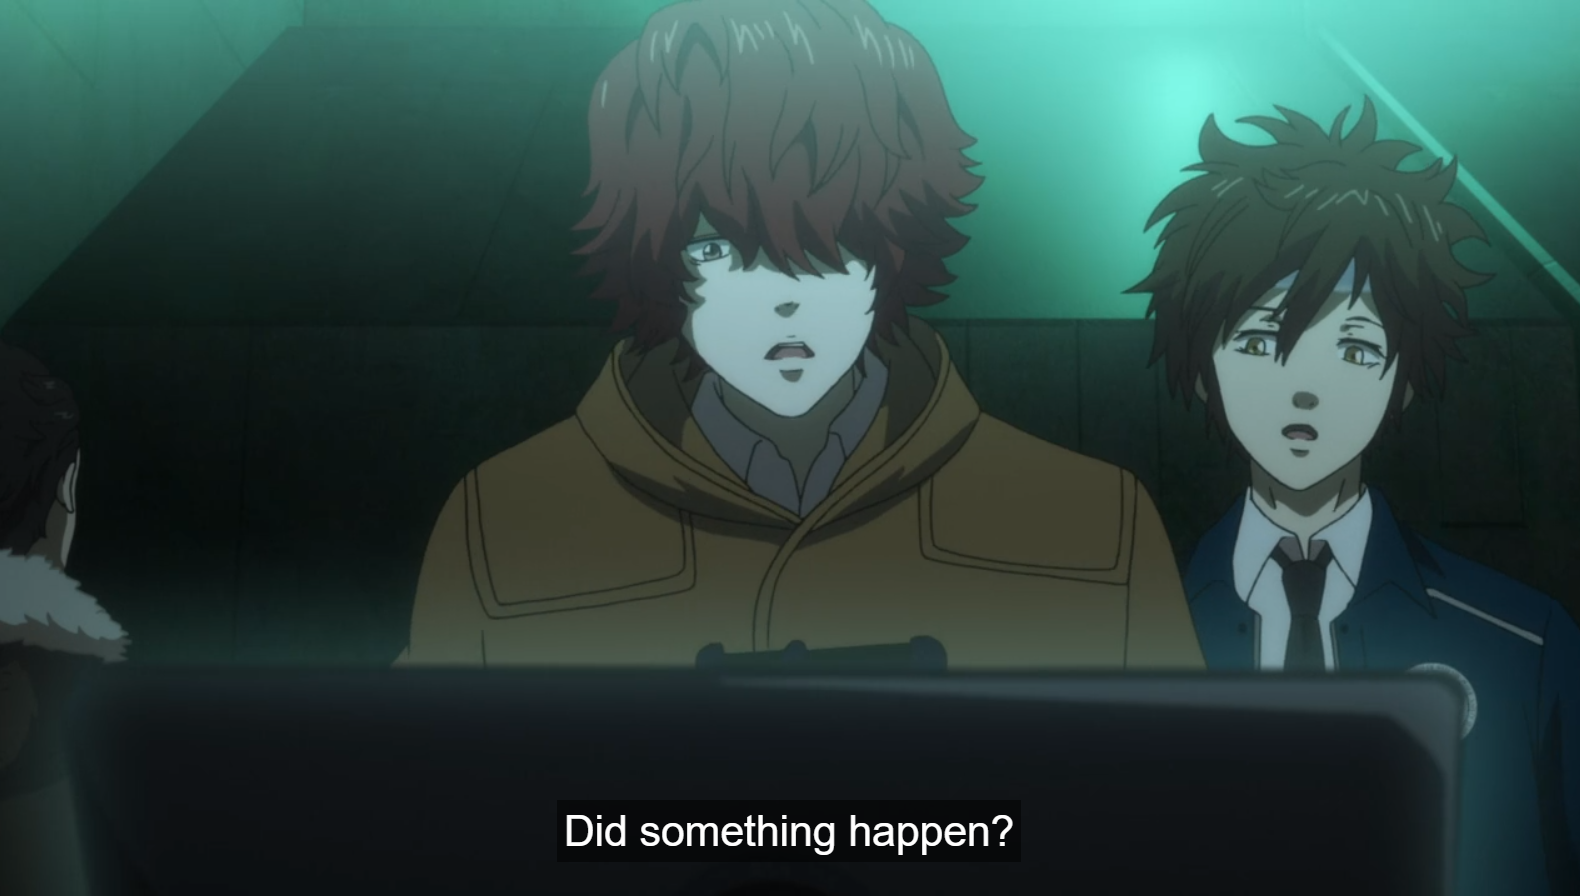 Psycho Pass s3 ep5 - Leap of Faith - I drink and watch anime